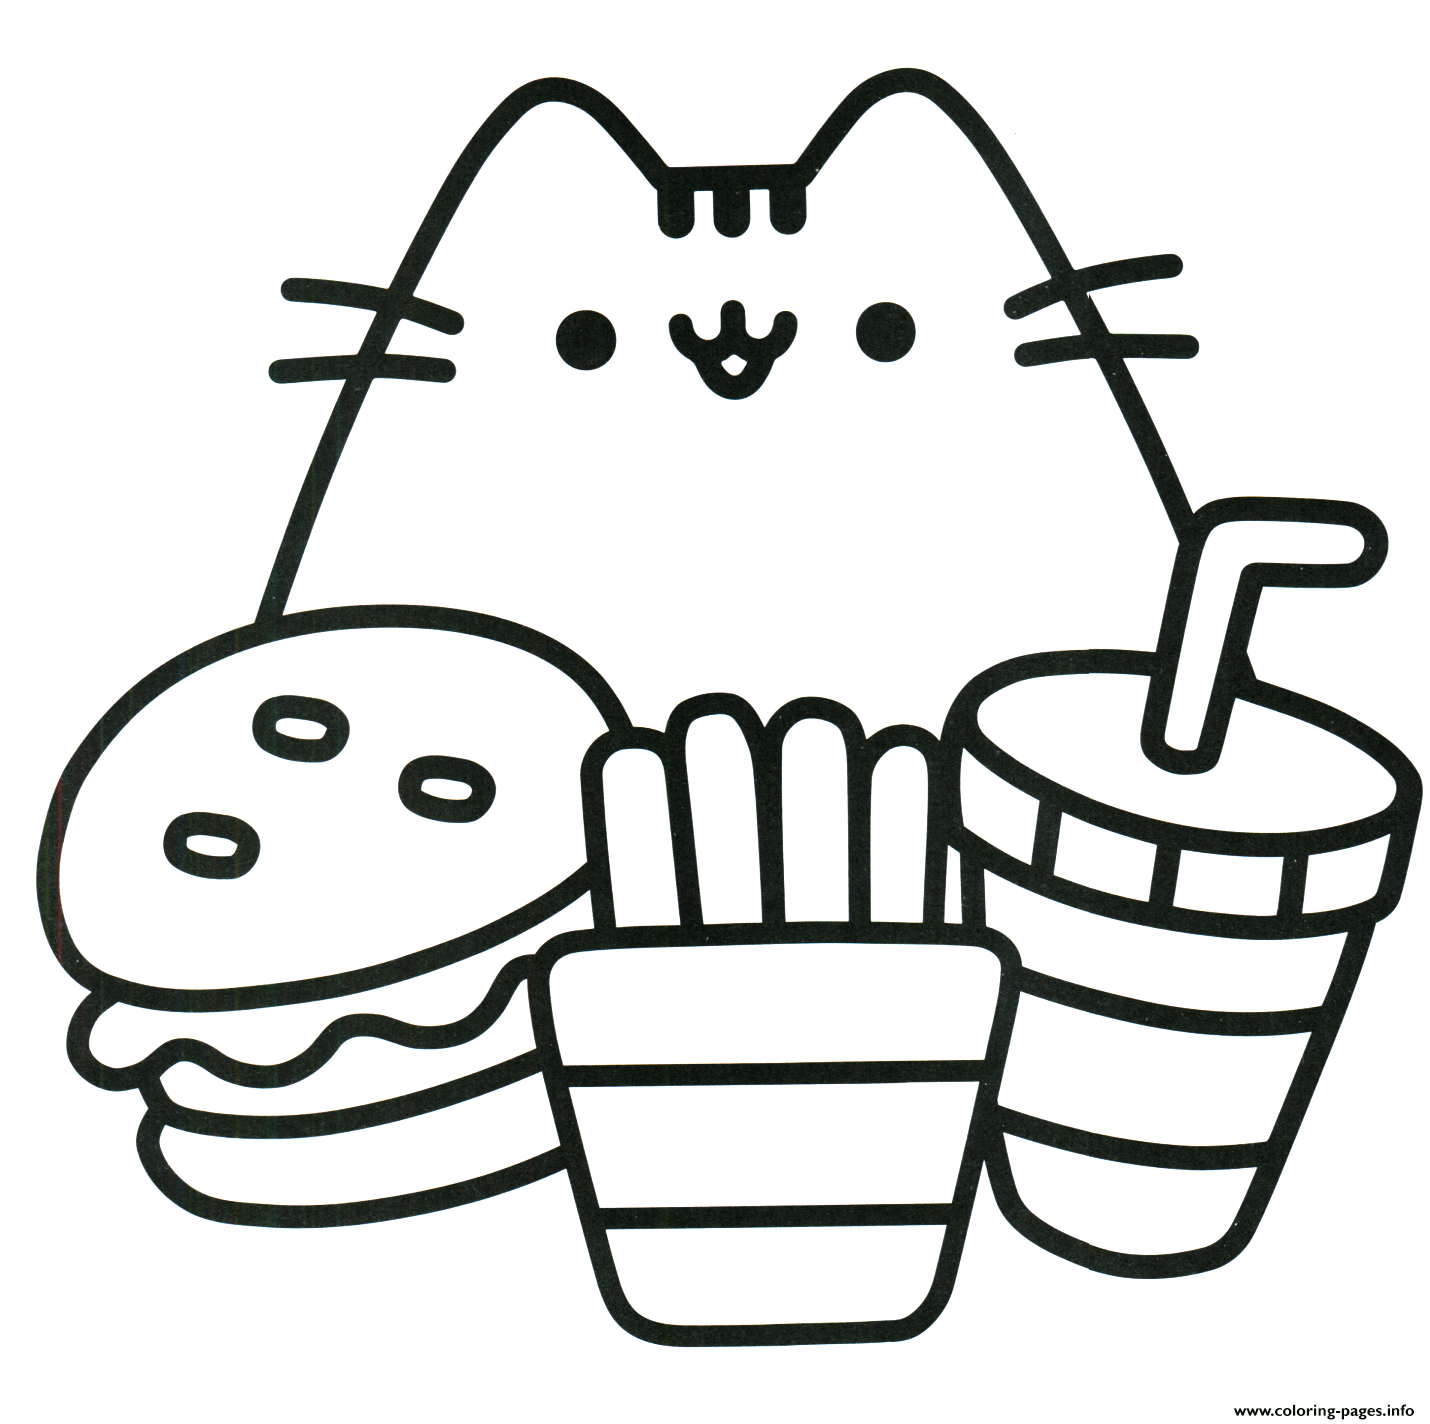 Pusheen Ready To Eat Food coloring